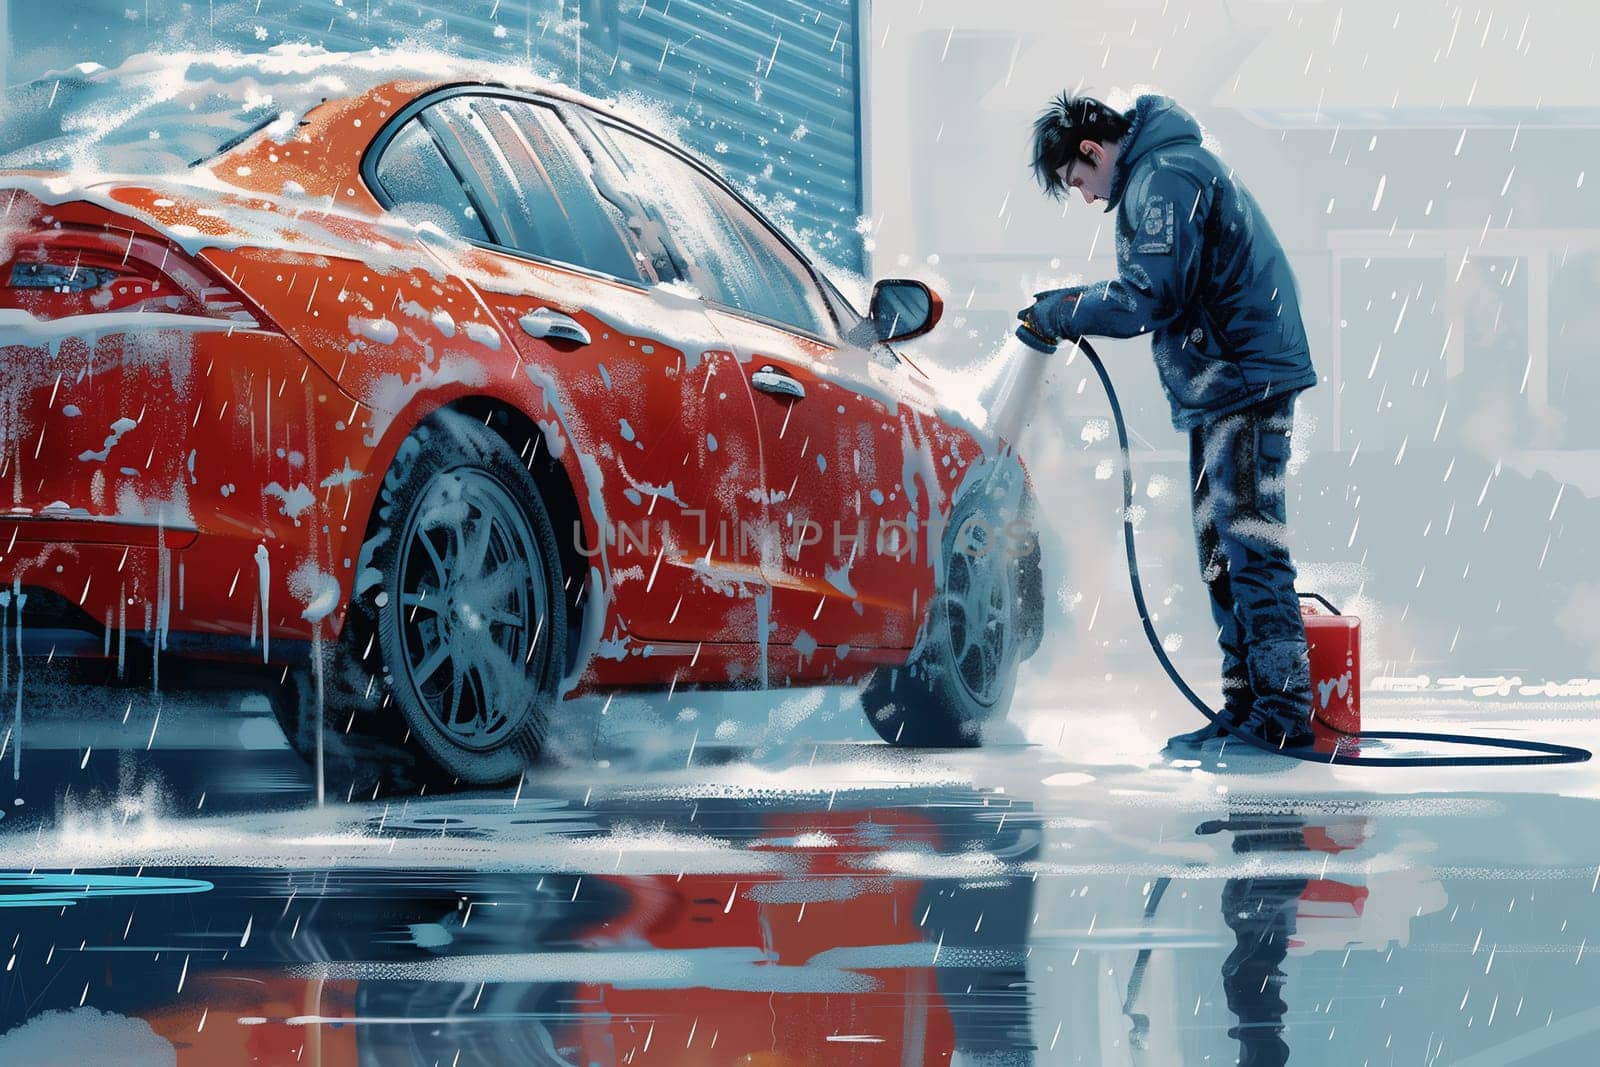 Hand washing with high pressure water, spraying water on the car. Self-service car wash by Andelov13